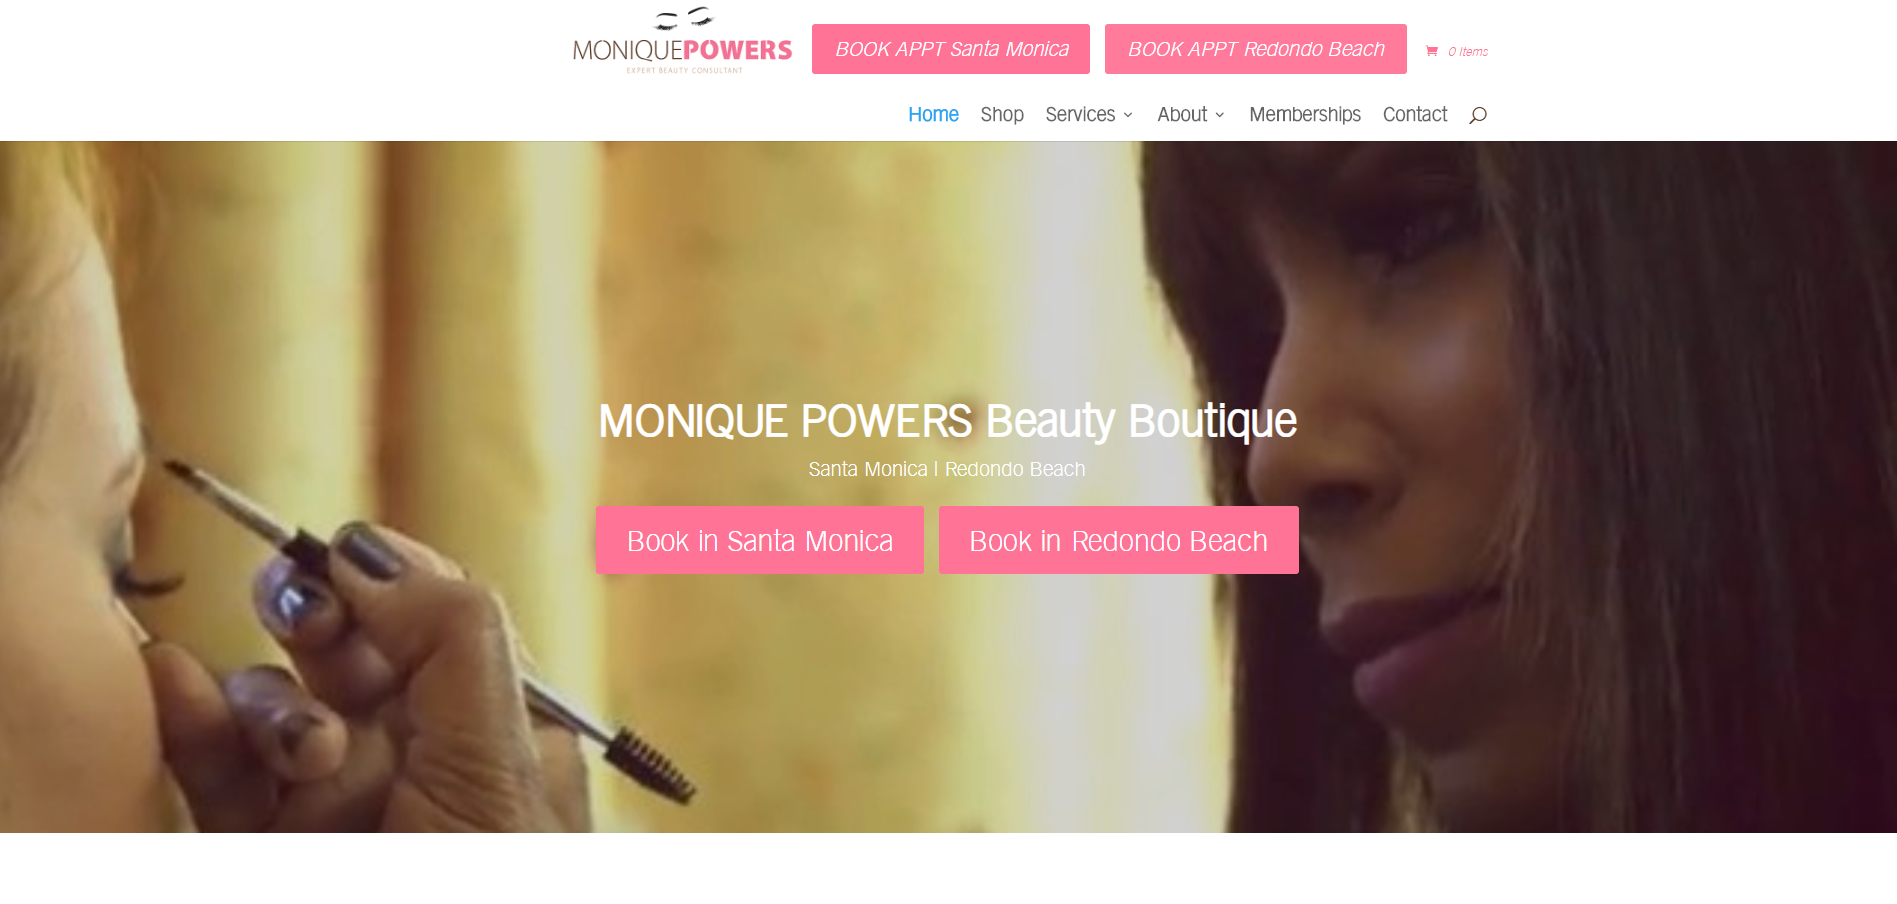 Monique Powers, Makeup Artist, Draws Up New Eyebrow Product Line and Website